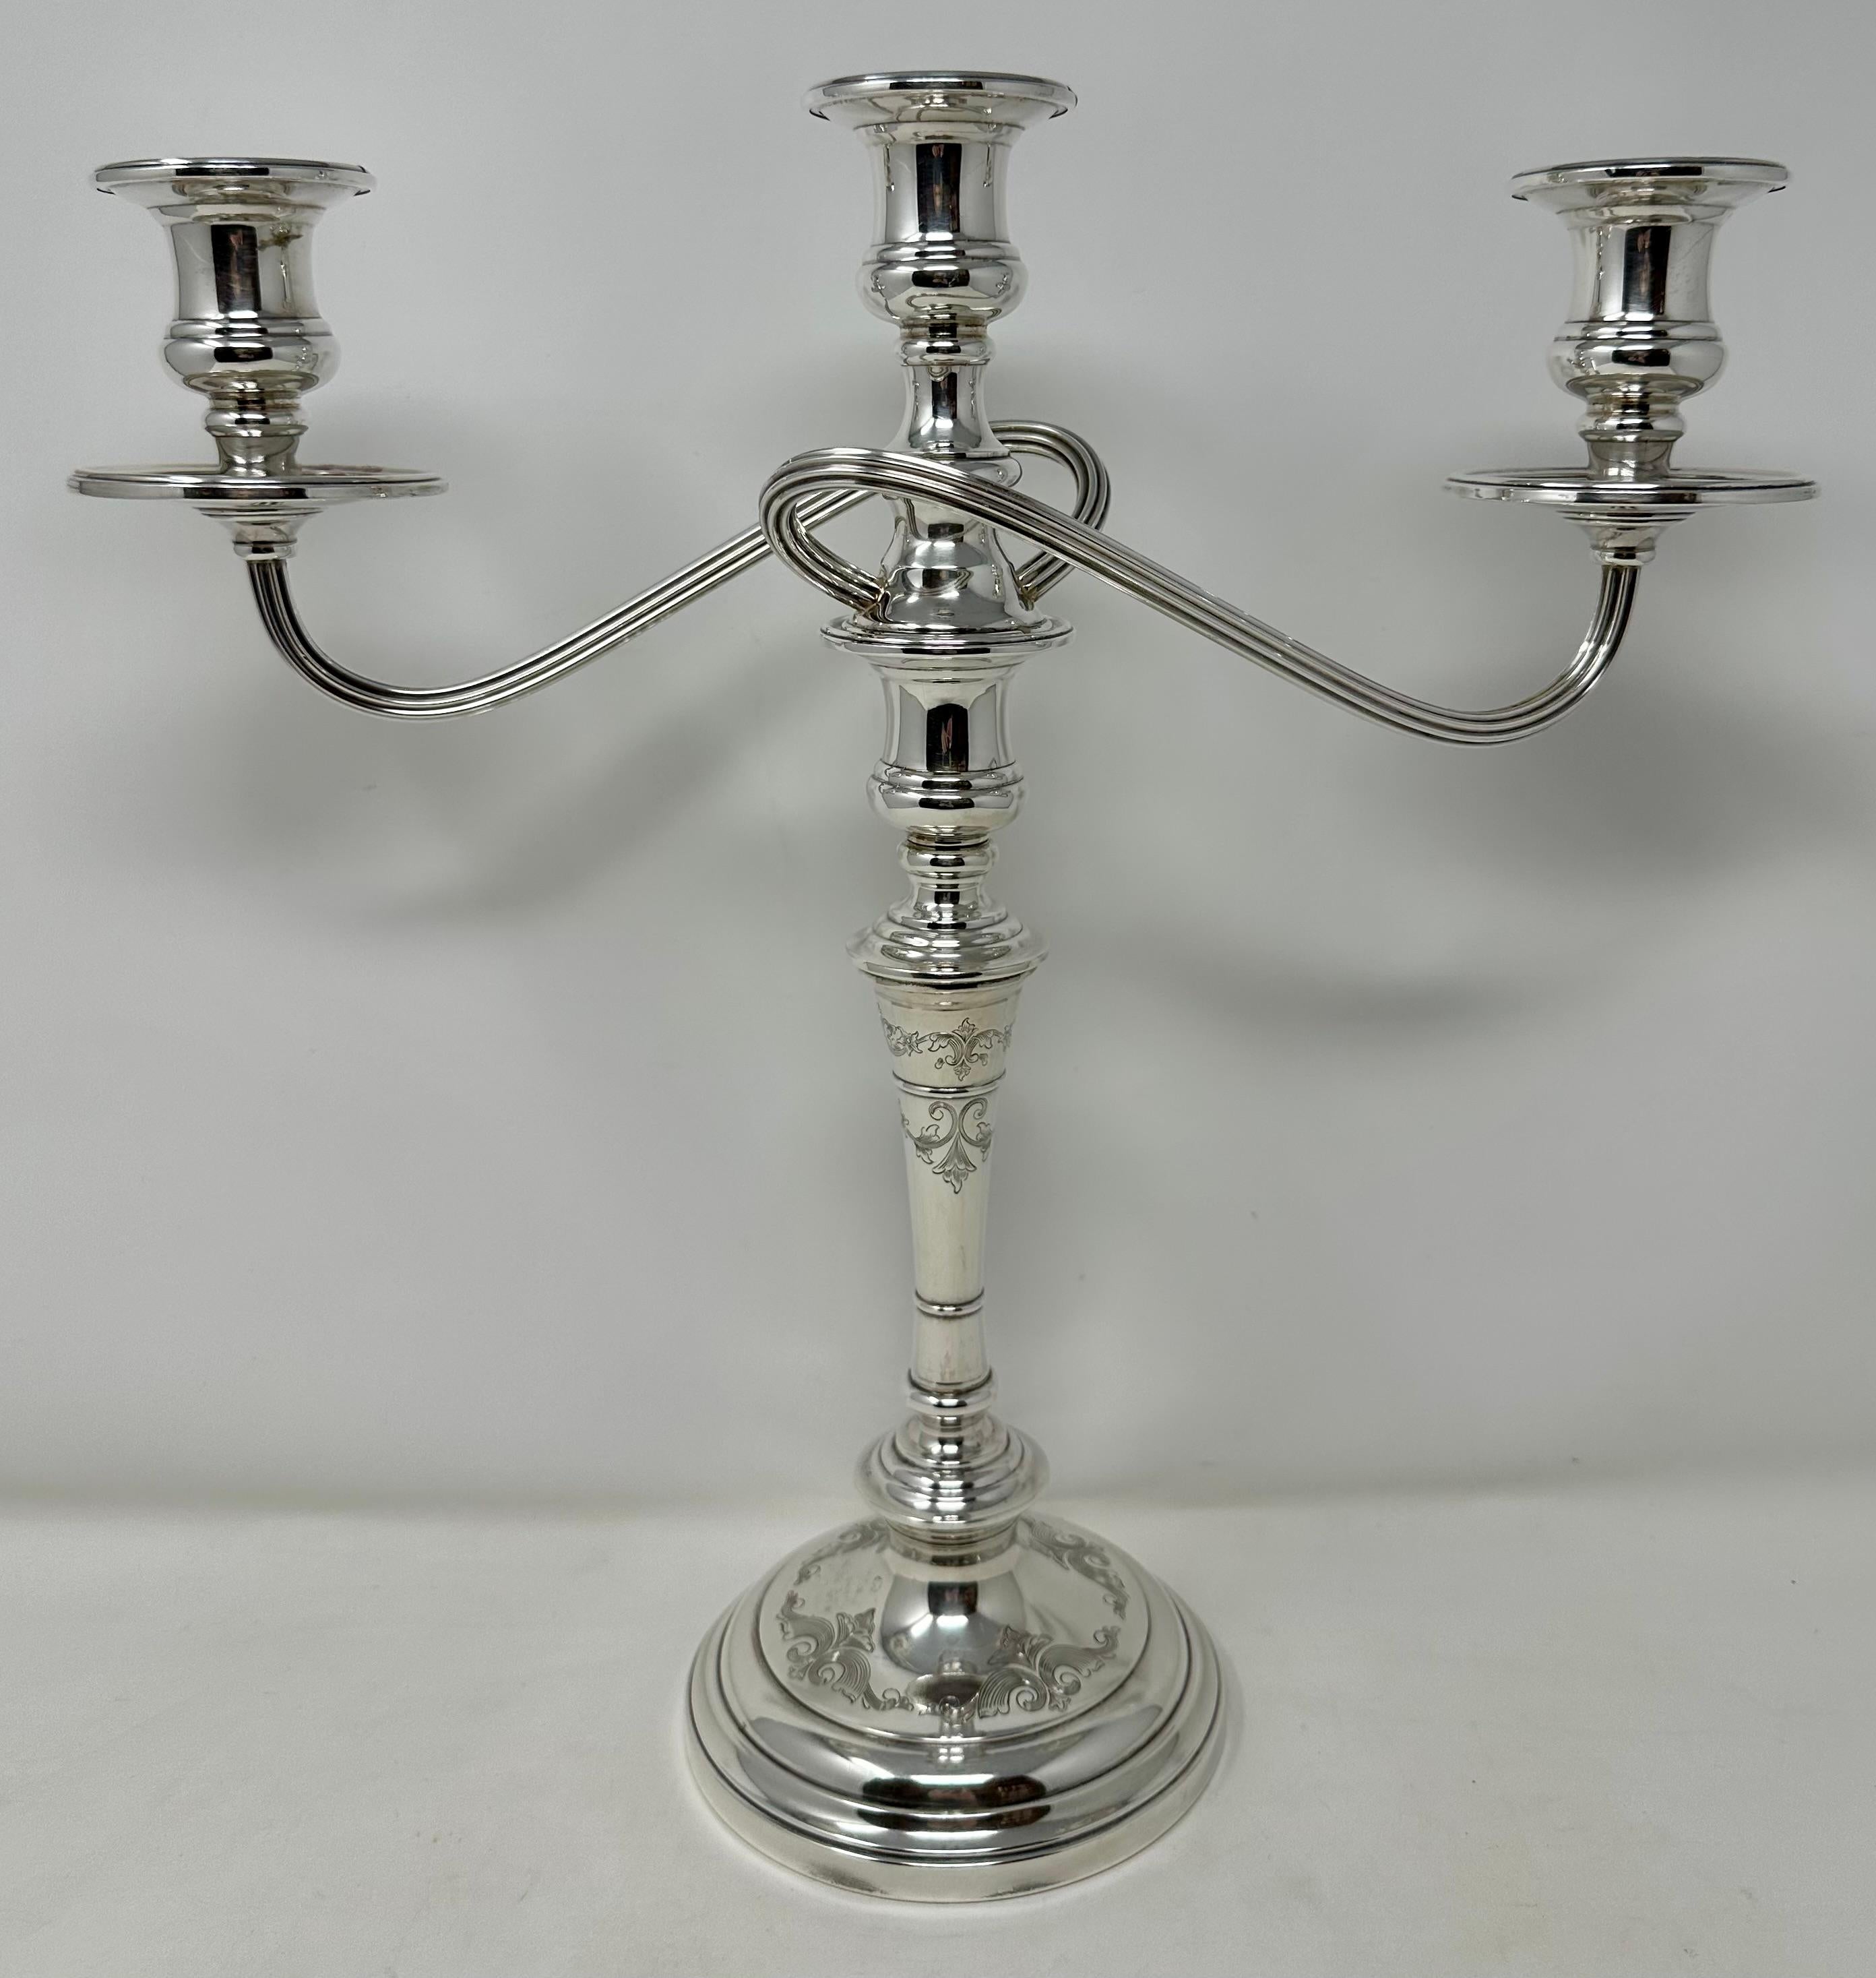 Estate American Sterling Silver Hallmarked Convertible Candelabra, Circa 1950's.
Can be converted from 3 cup candelabra to single cup candlesticks.